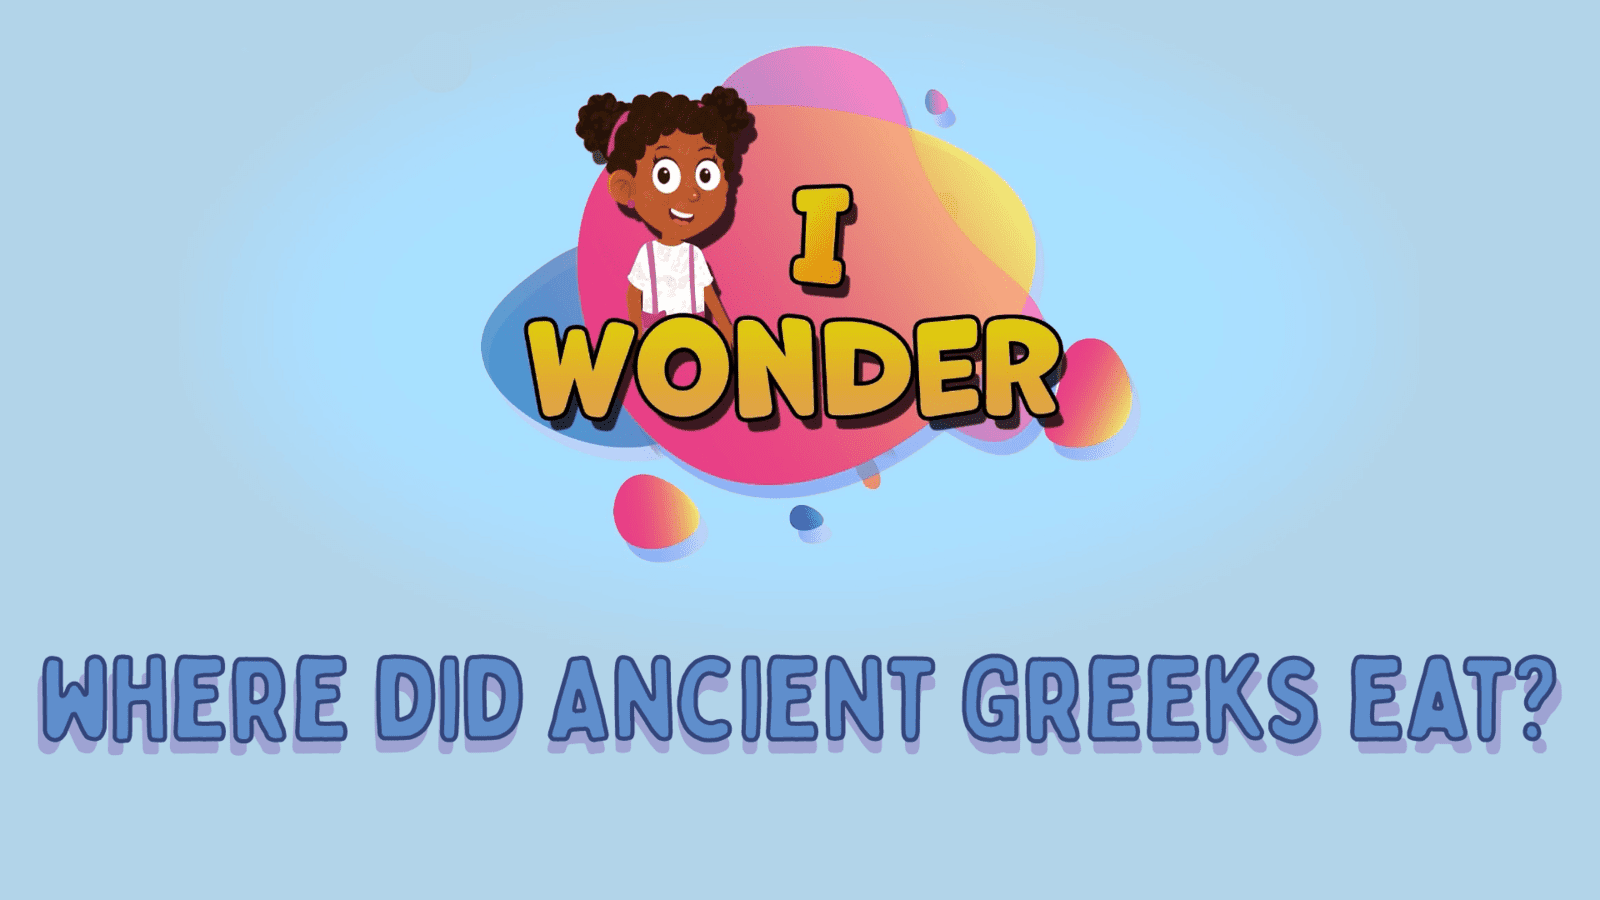 Where Did Ancient Greeks Eat?